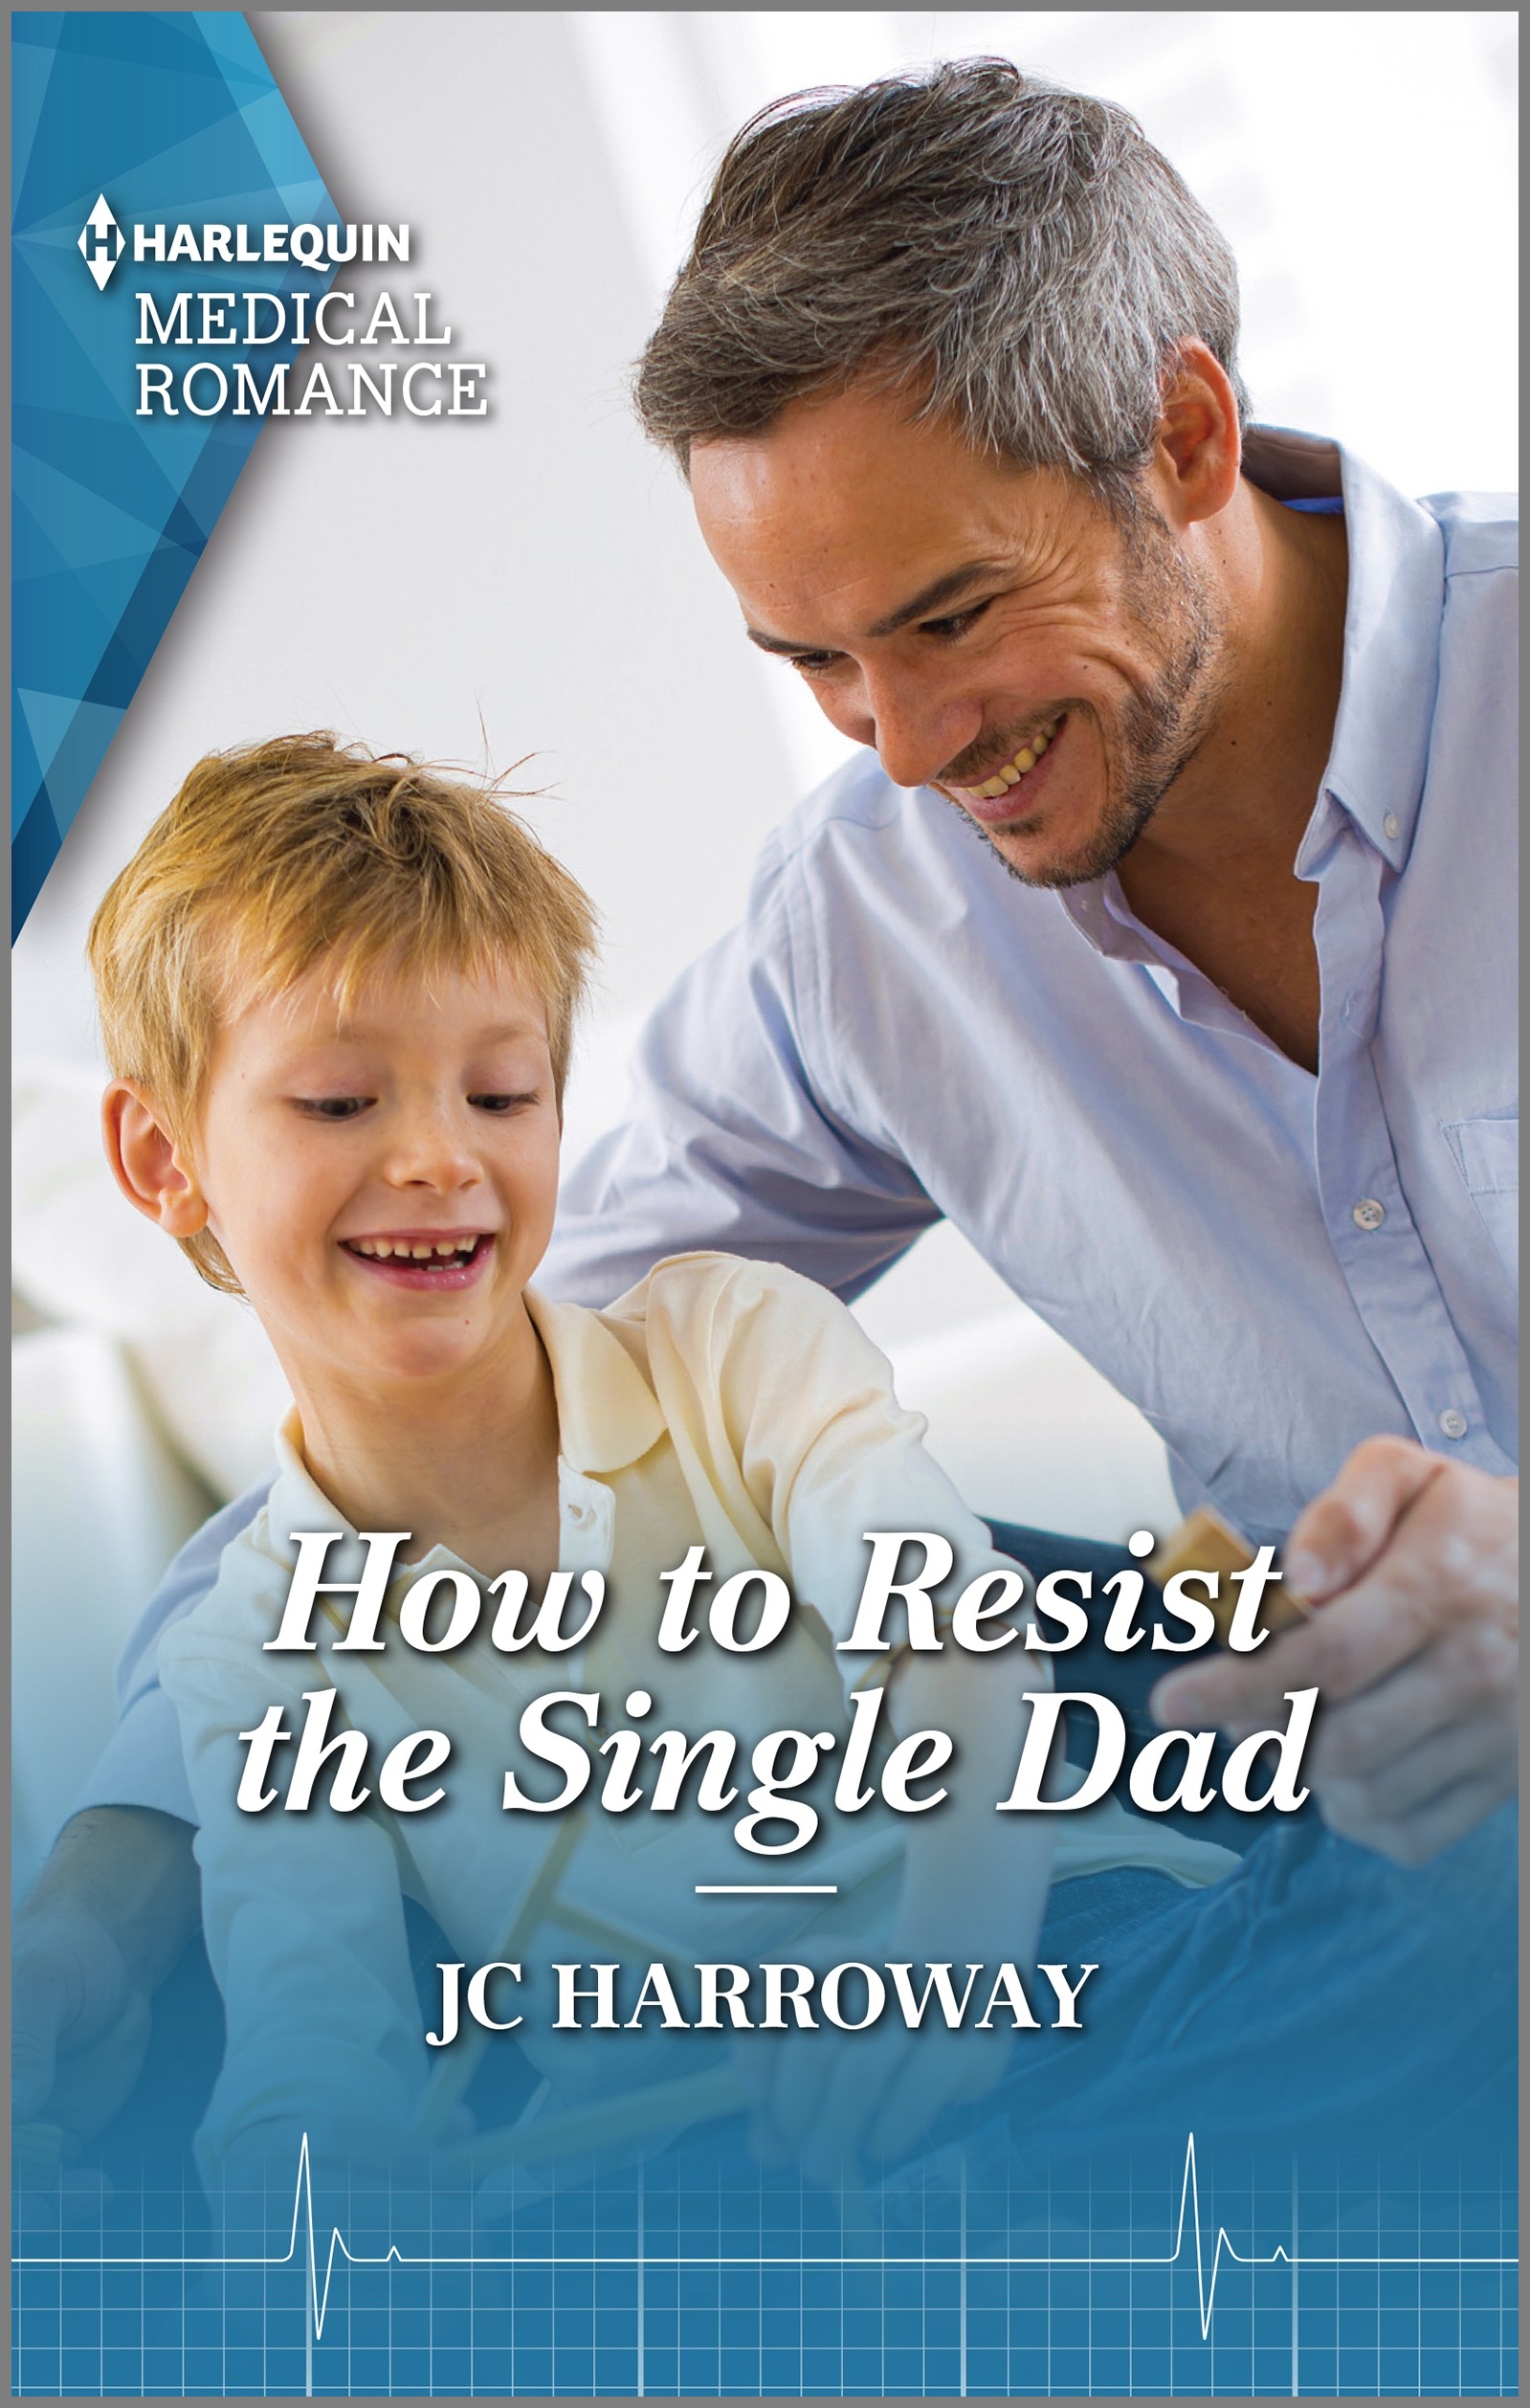 HOW TO RESIST THE SINGLE DAD by JC Harroway